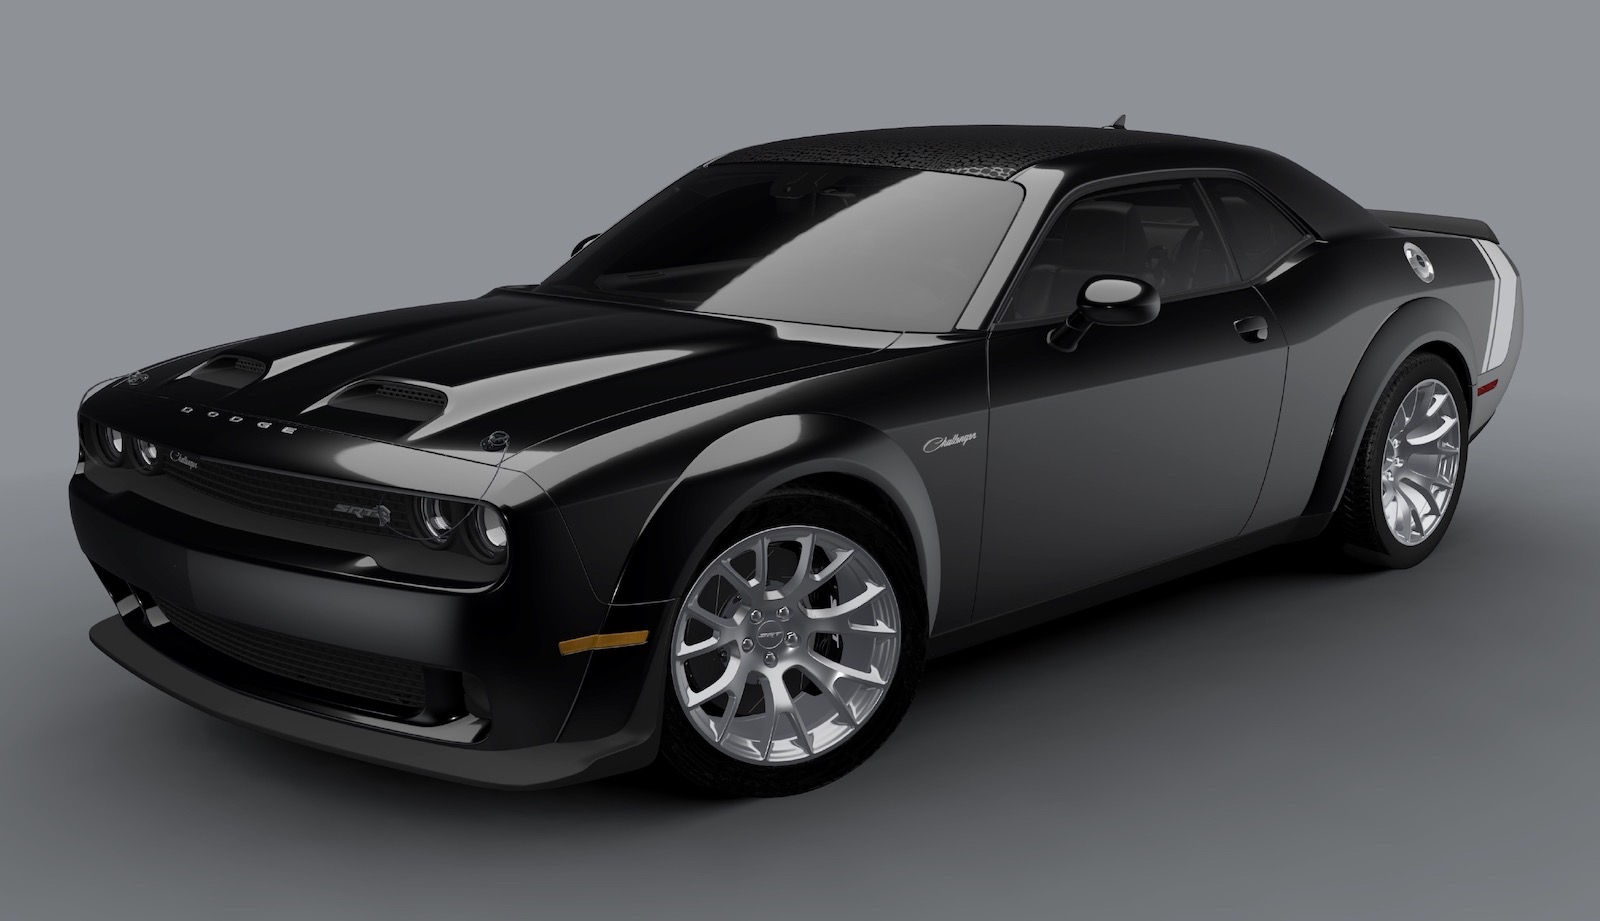 Dodge Challenger Black Ghost edition debuts, part of ‘Last Call’ collection